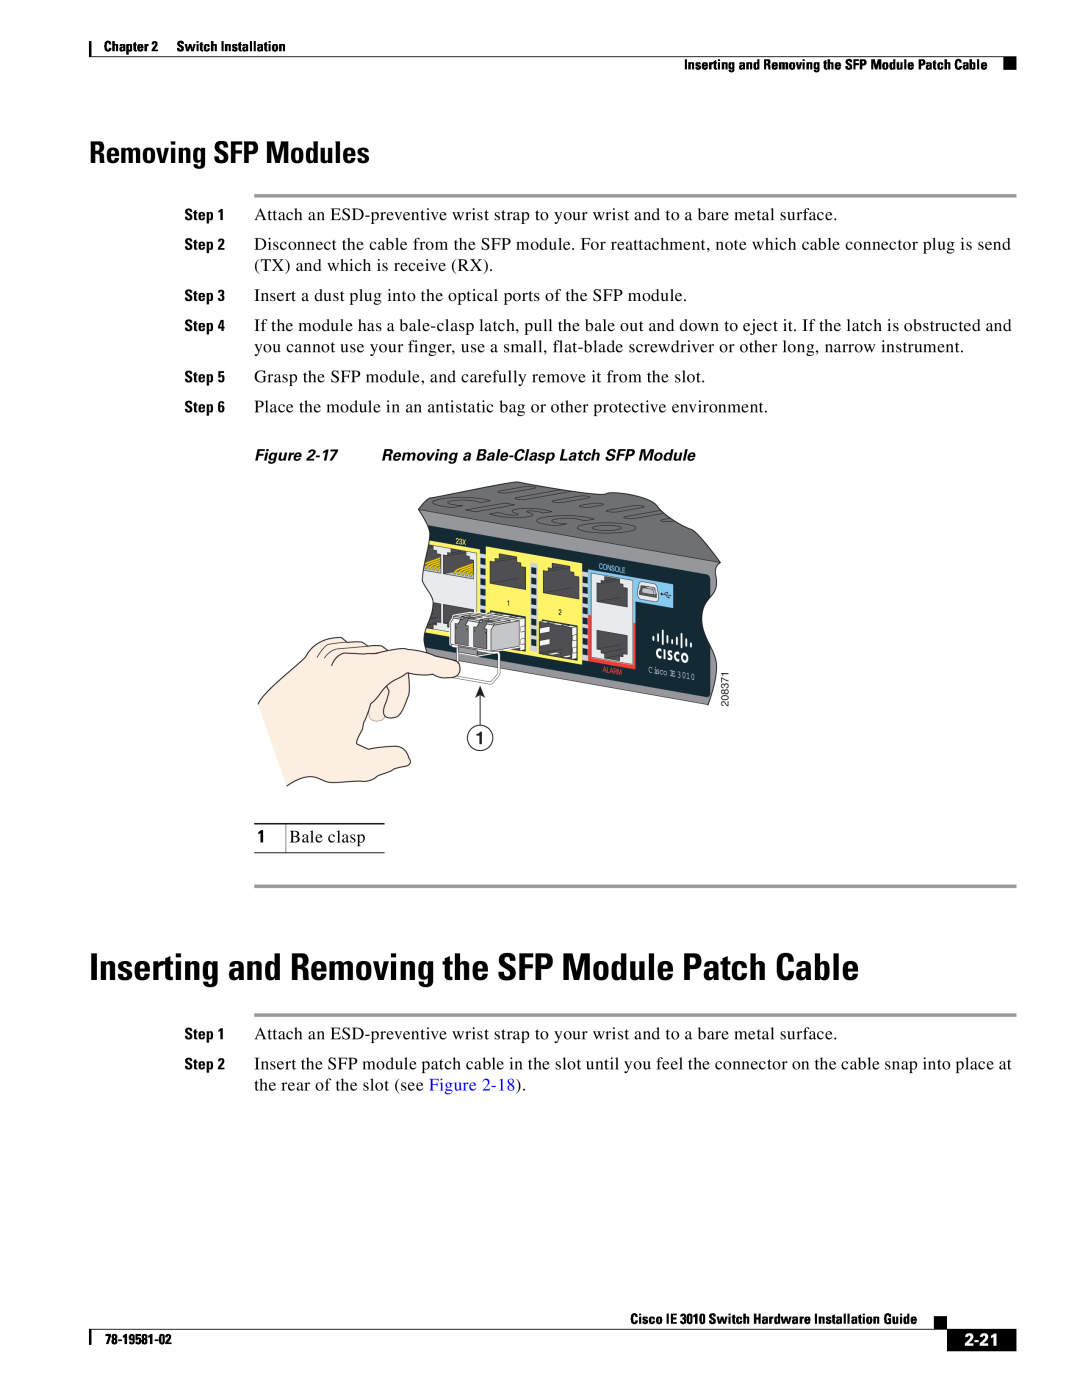 Cisco Systems IE301024TC manual Inserting and Removing the SFP Module Patch Cable, Removing SFP Modules, 2-21 